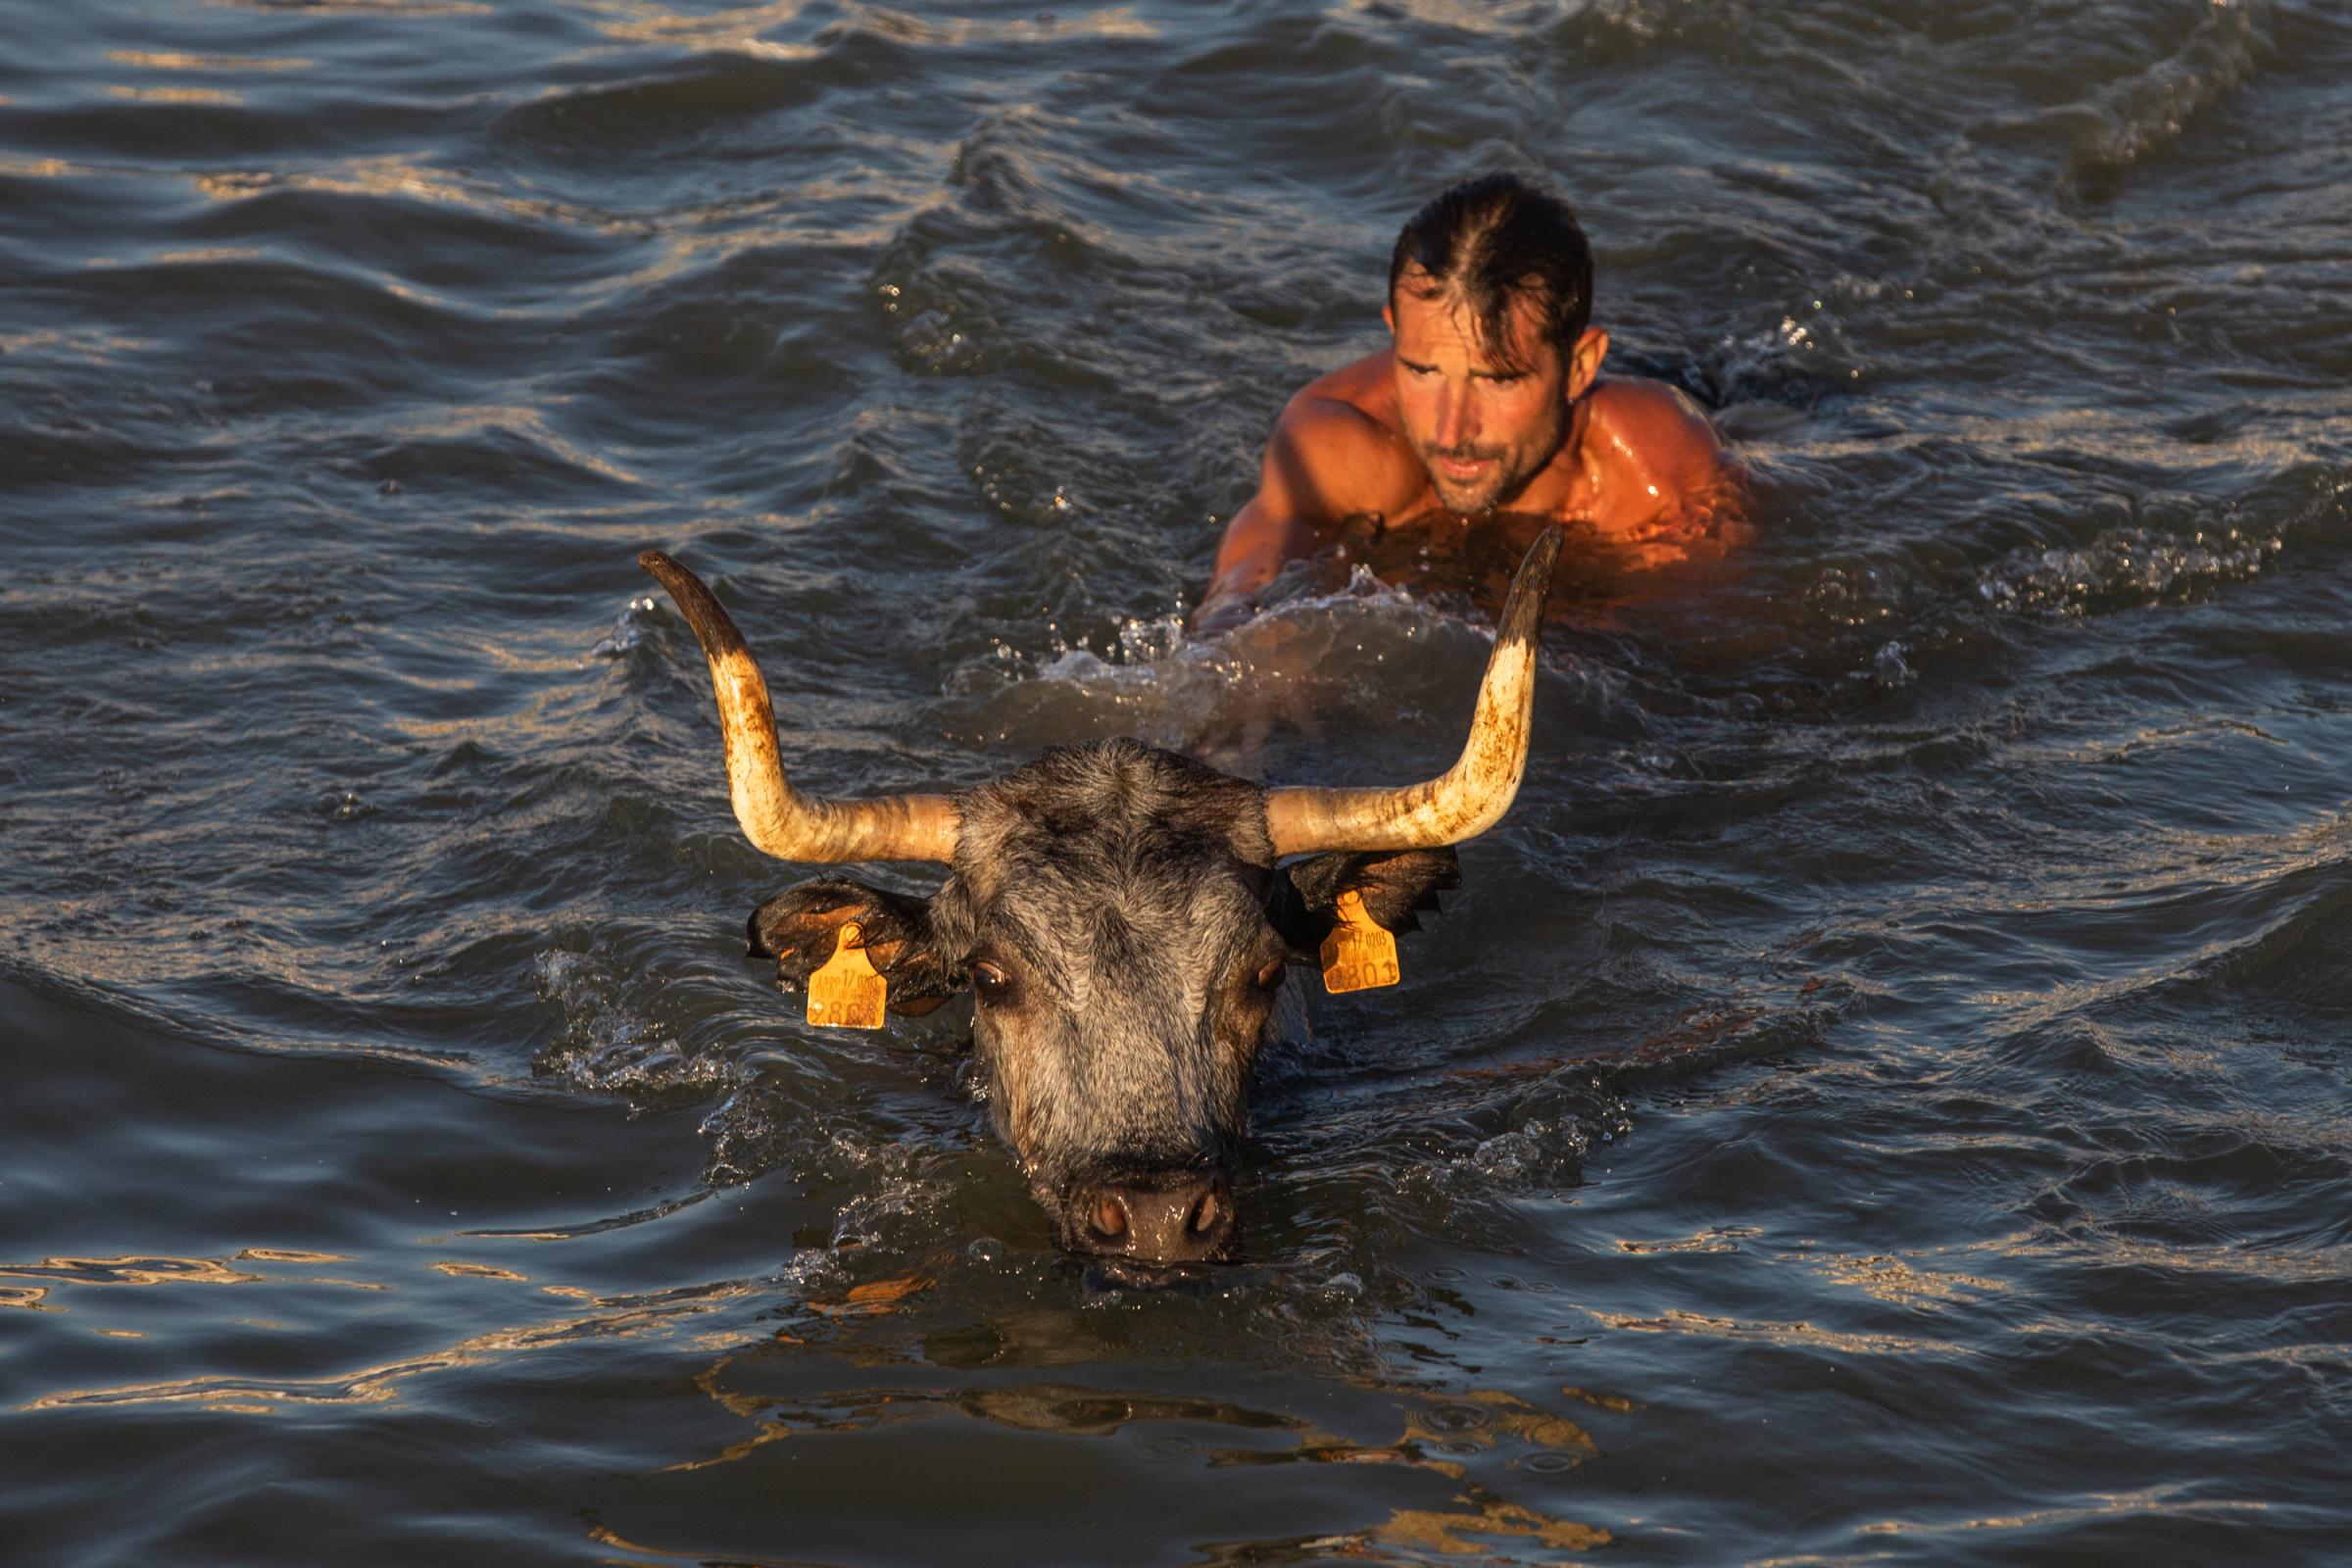 At 'Bous A La Mar', Revelers Take Plunge To Dodge Bulls And Beat The Heat - DENIA, SPAIN - JULY 17: A participant in the running of...